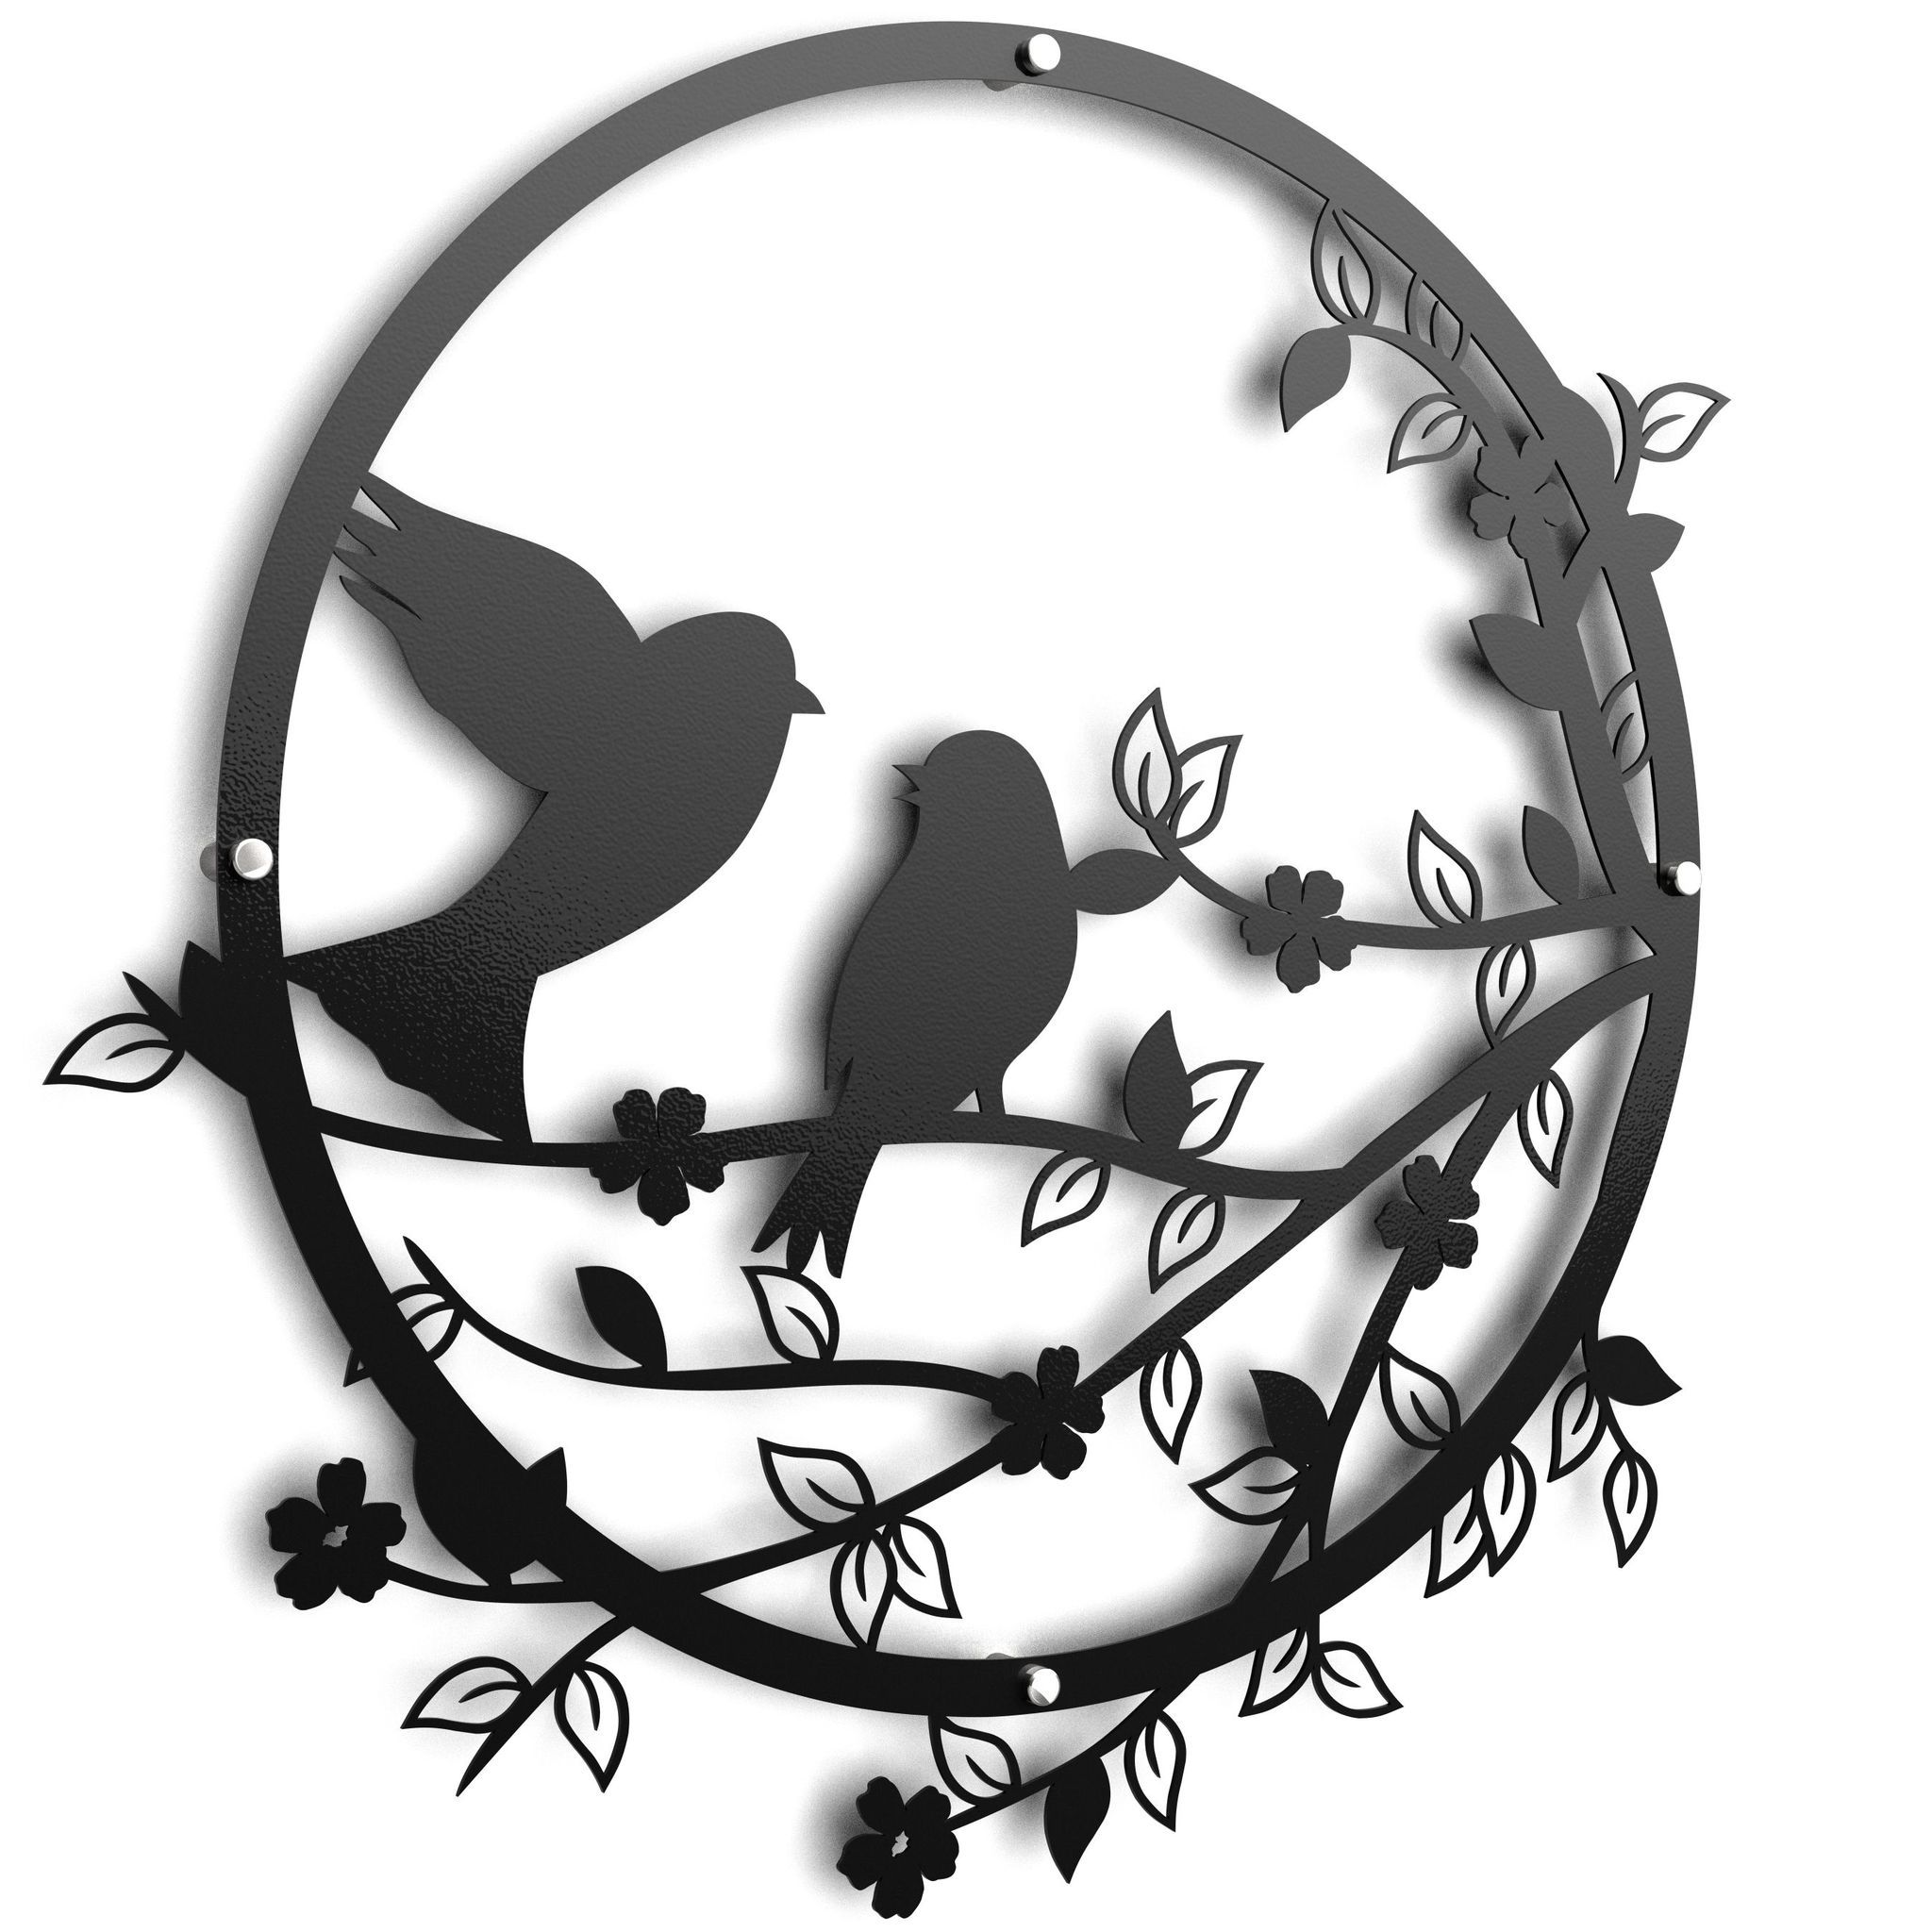 Tweety Birds Raised Metal Wall Art Home Décor - 60x60cm By Unexpected Worx